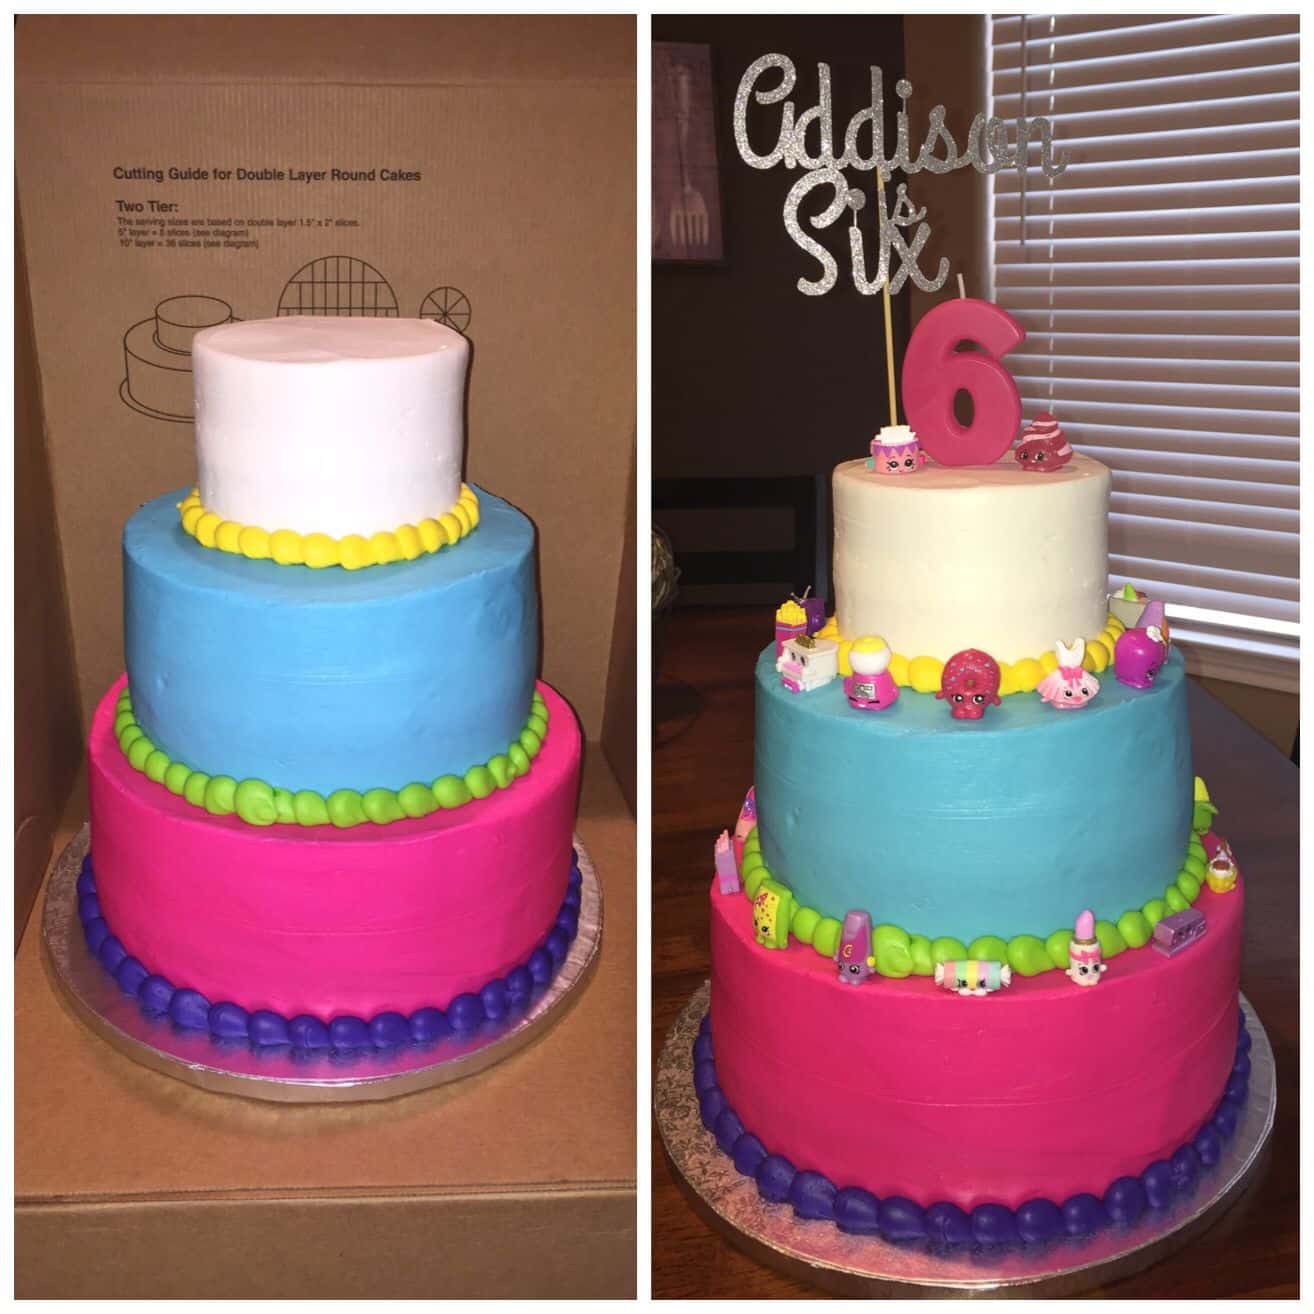 Shopkins Cake. Ordered 3 tiered cake from Sam